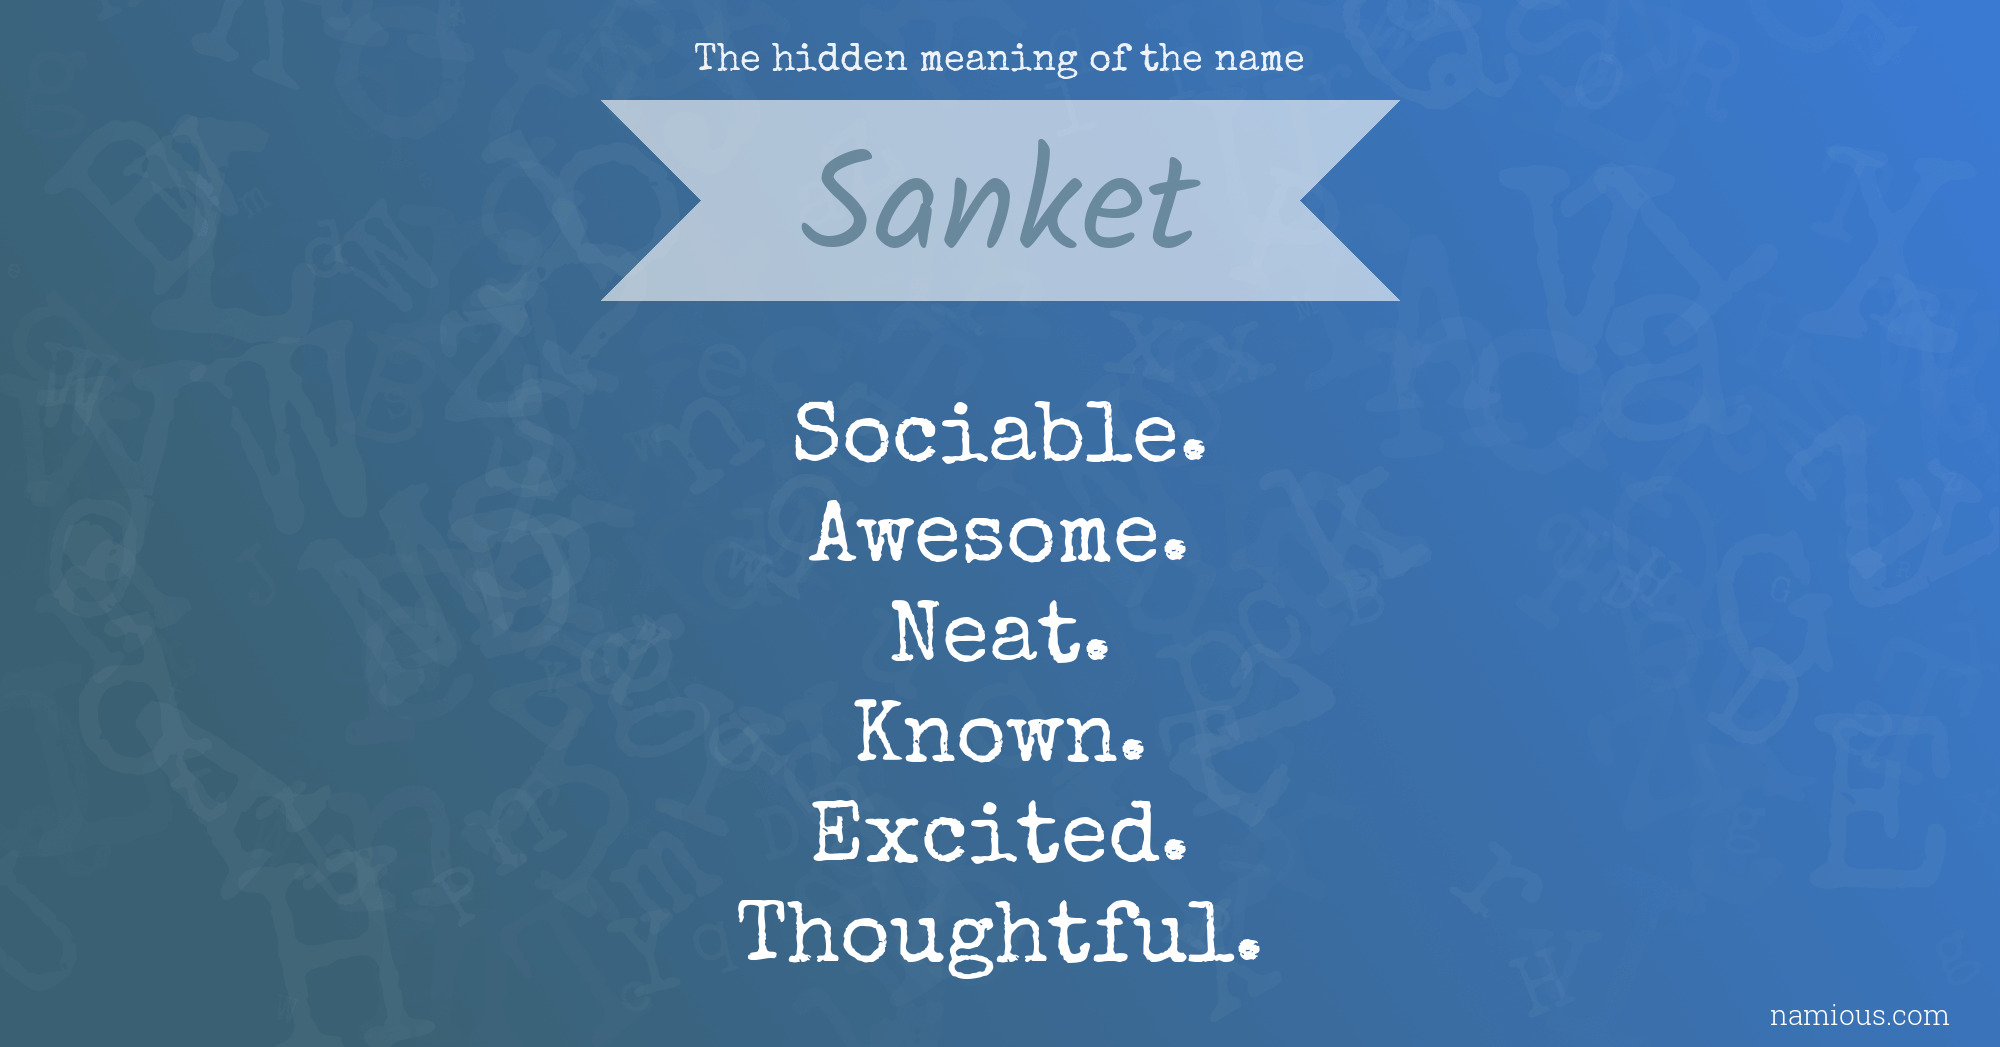 The hidden meaning of the name Sanket